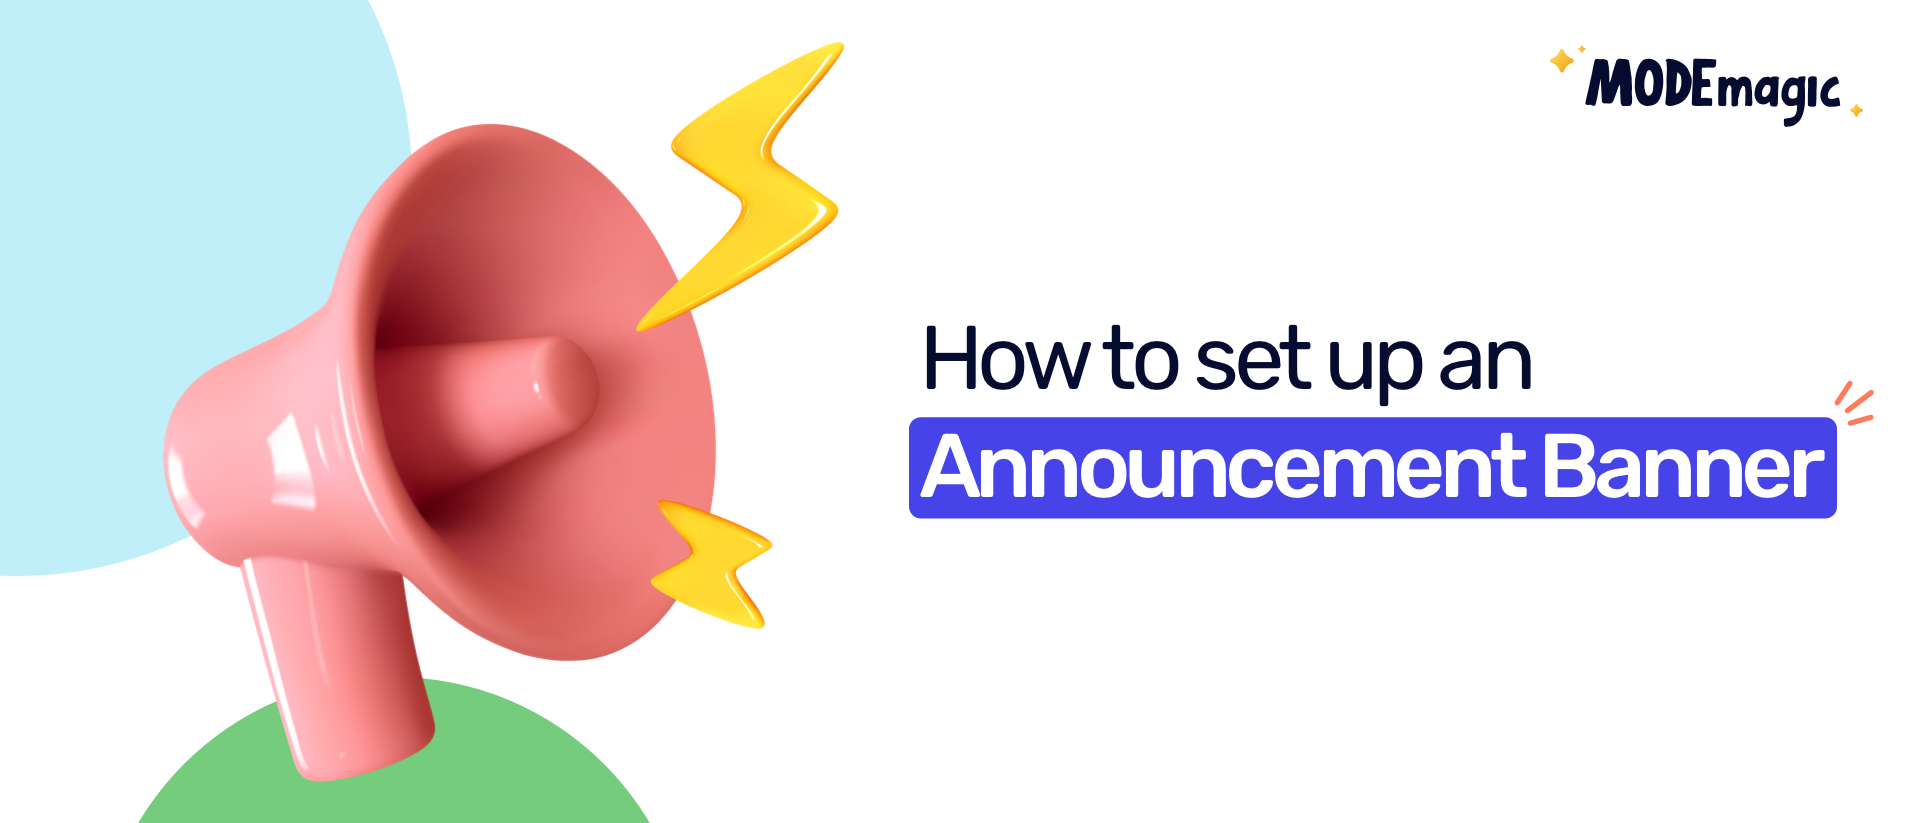 How To Add An Announcement Banner to Your Shopify Store